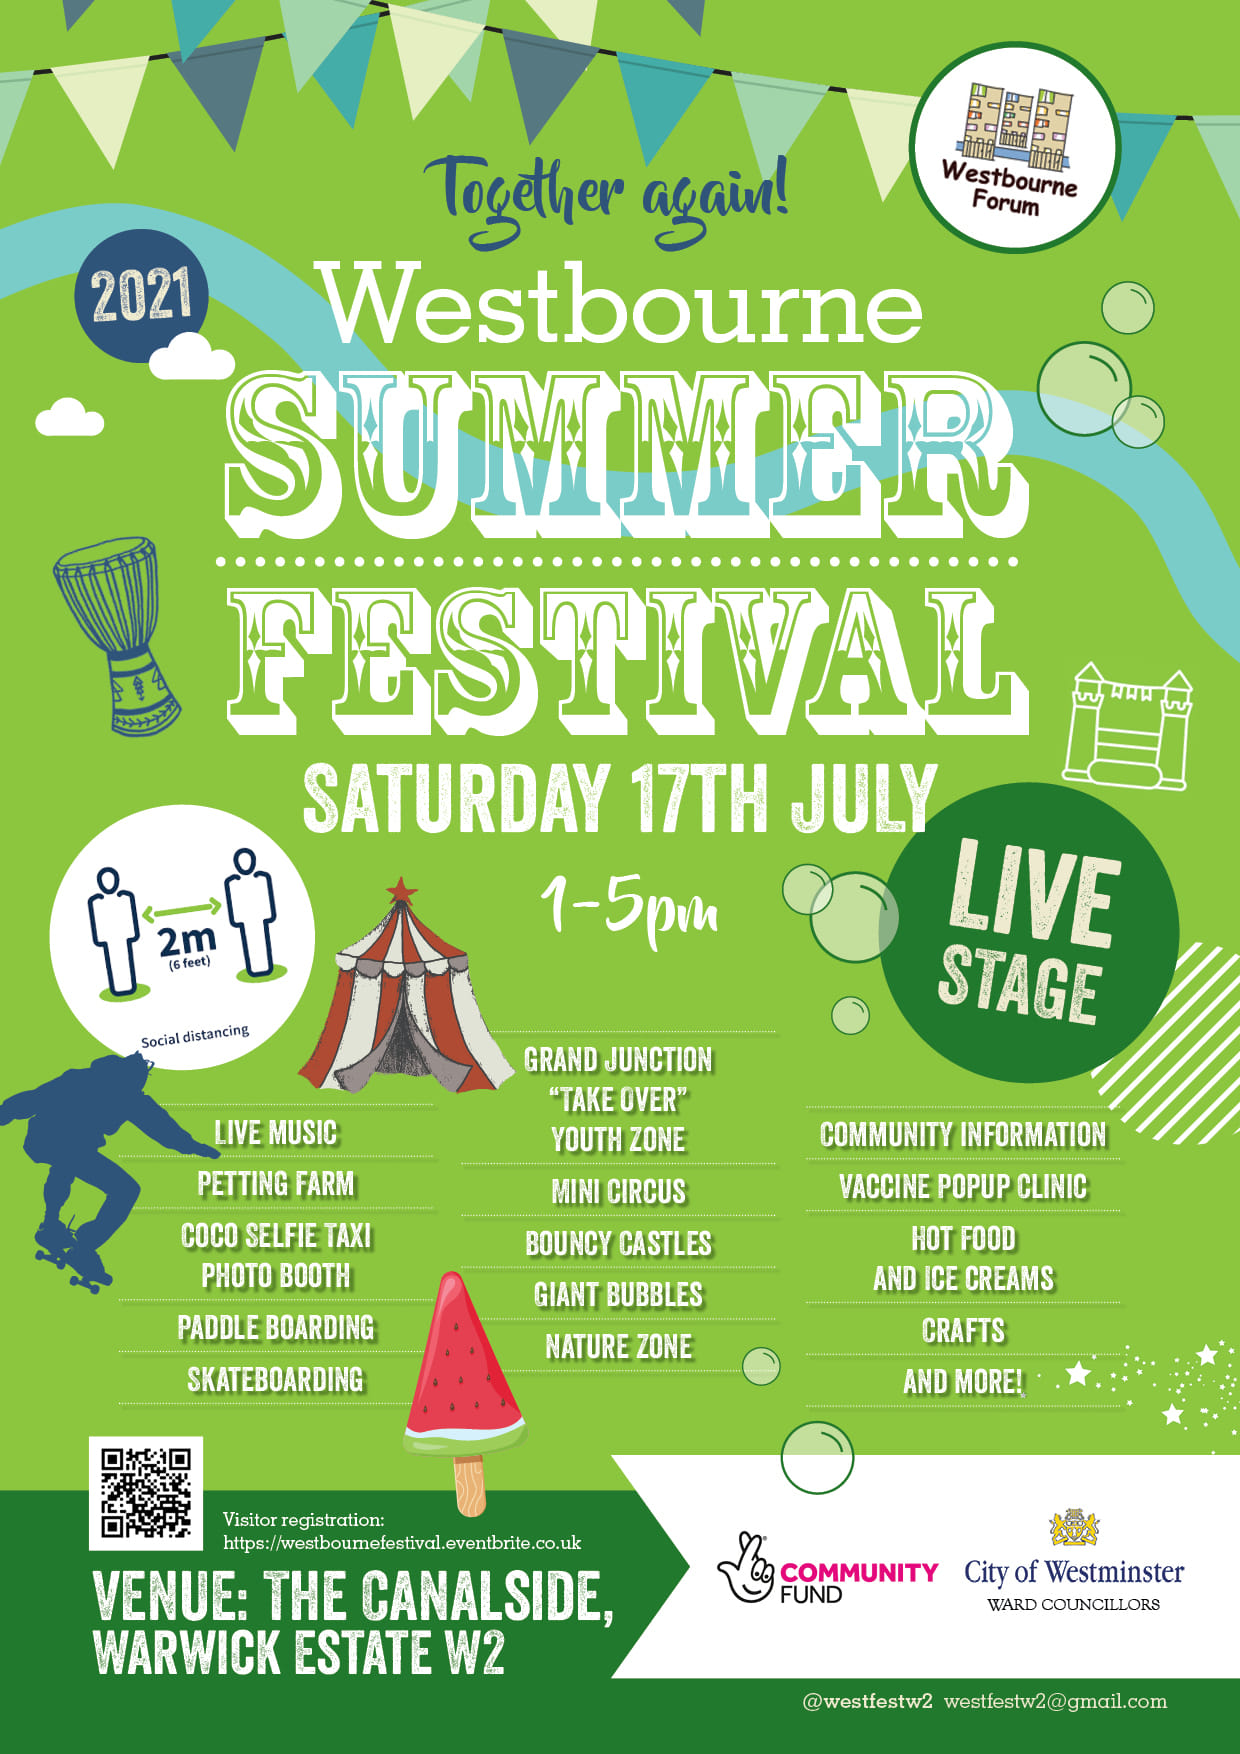 Together again!

Westbourne 2021

SUMMER FESTIVAL SATURDAY 17TH JULY

1 - 5 рm

Live Music
Petting Farm
Coco Selfie Taxi Photo Booth
Paddle Boarding
Skateboarding
Grand Junction "Take Over" youth Zone
Mini Circus
Bouncy Castle
Giant Bubbles
Nature Zone
Community Information
Vaccine Popup CLINICHot Food and Ice Creams
Crafts
And More!

VENUE: THE CANALSIDE, Warwick Estate W2

Visitor Registration: https://westbournefestival.eventbrite.co.uk

@westfestw2

westfestw2@gmail.com